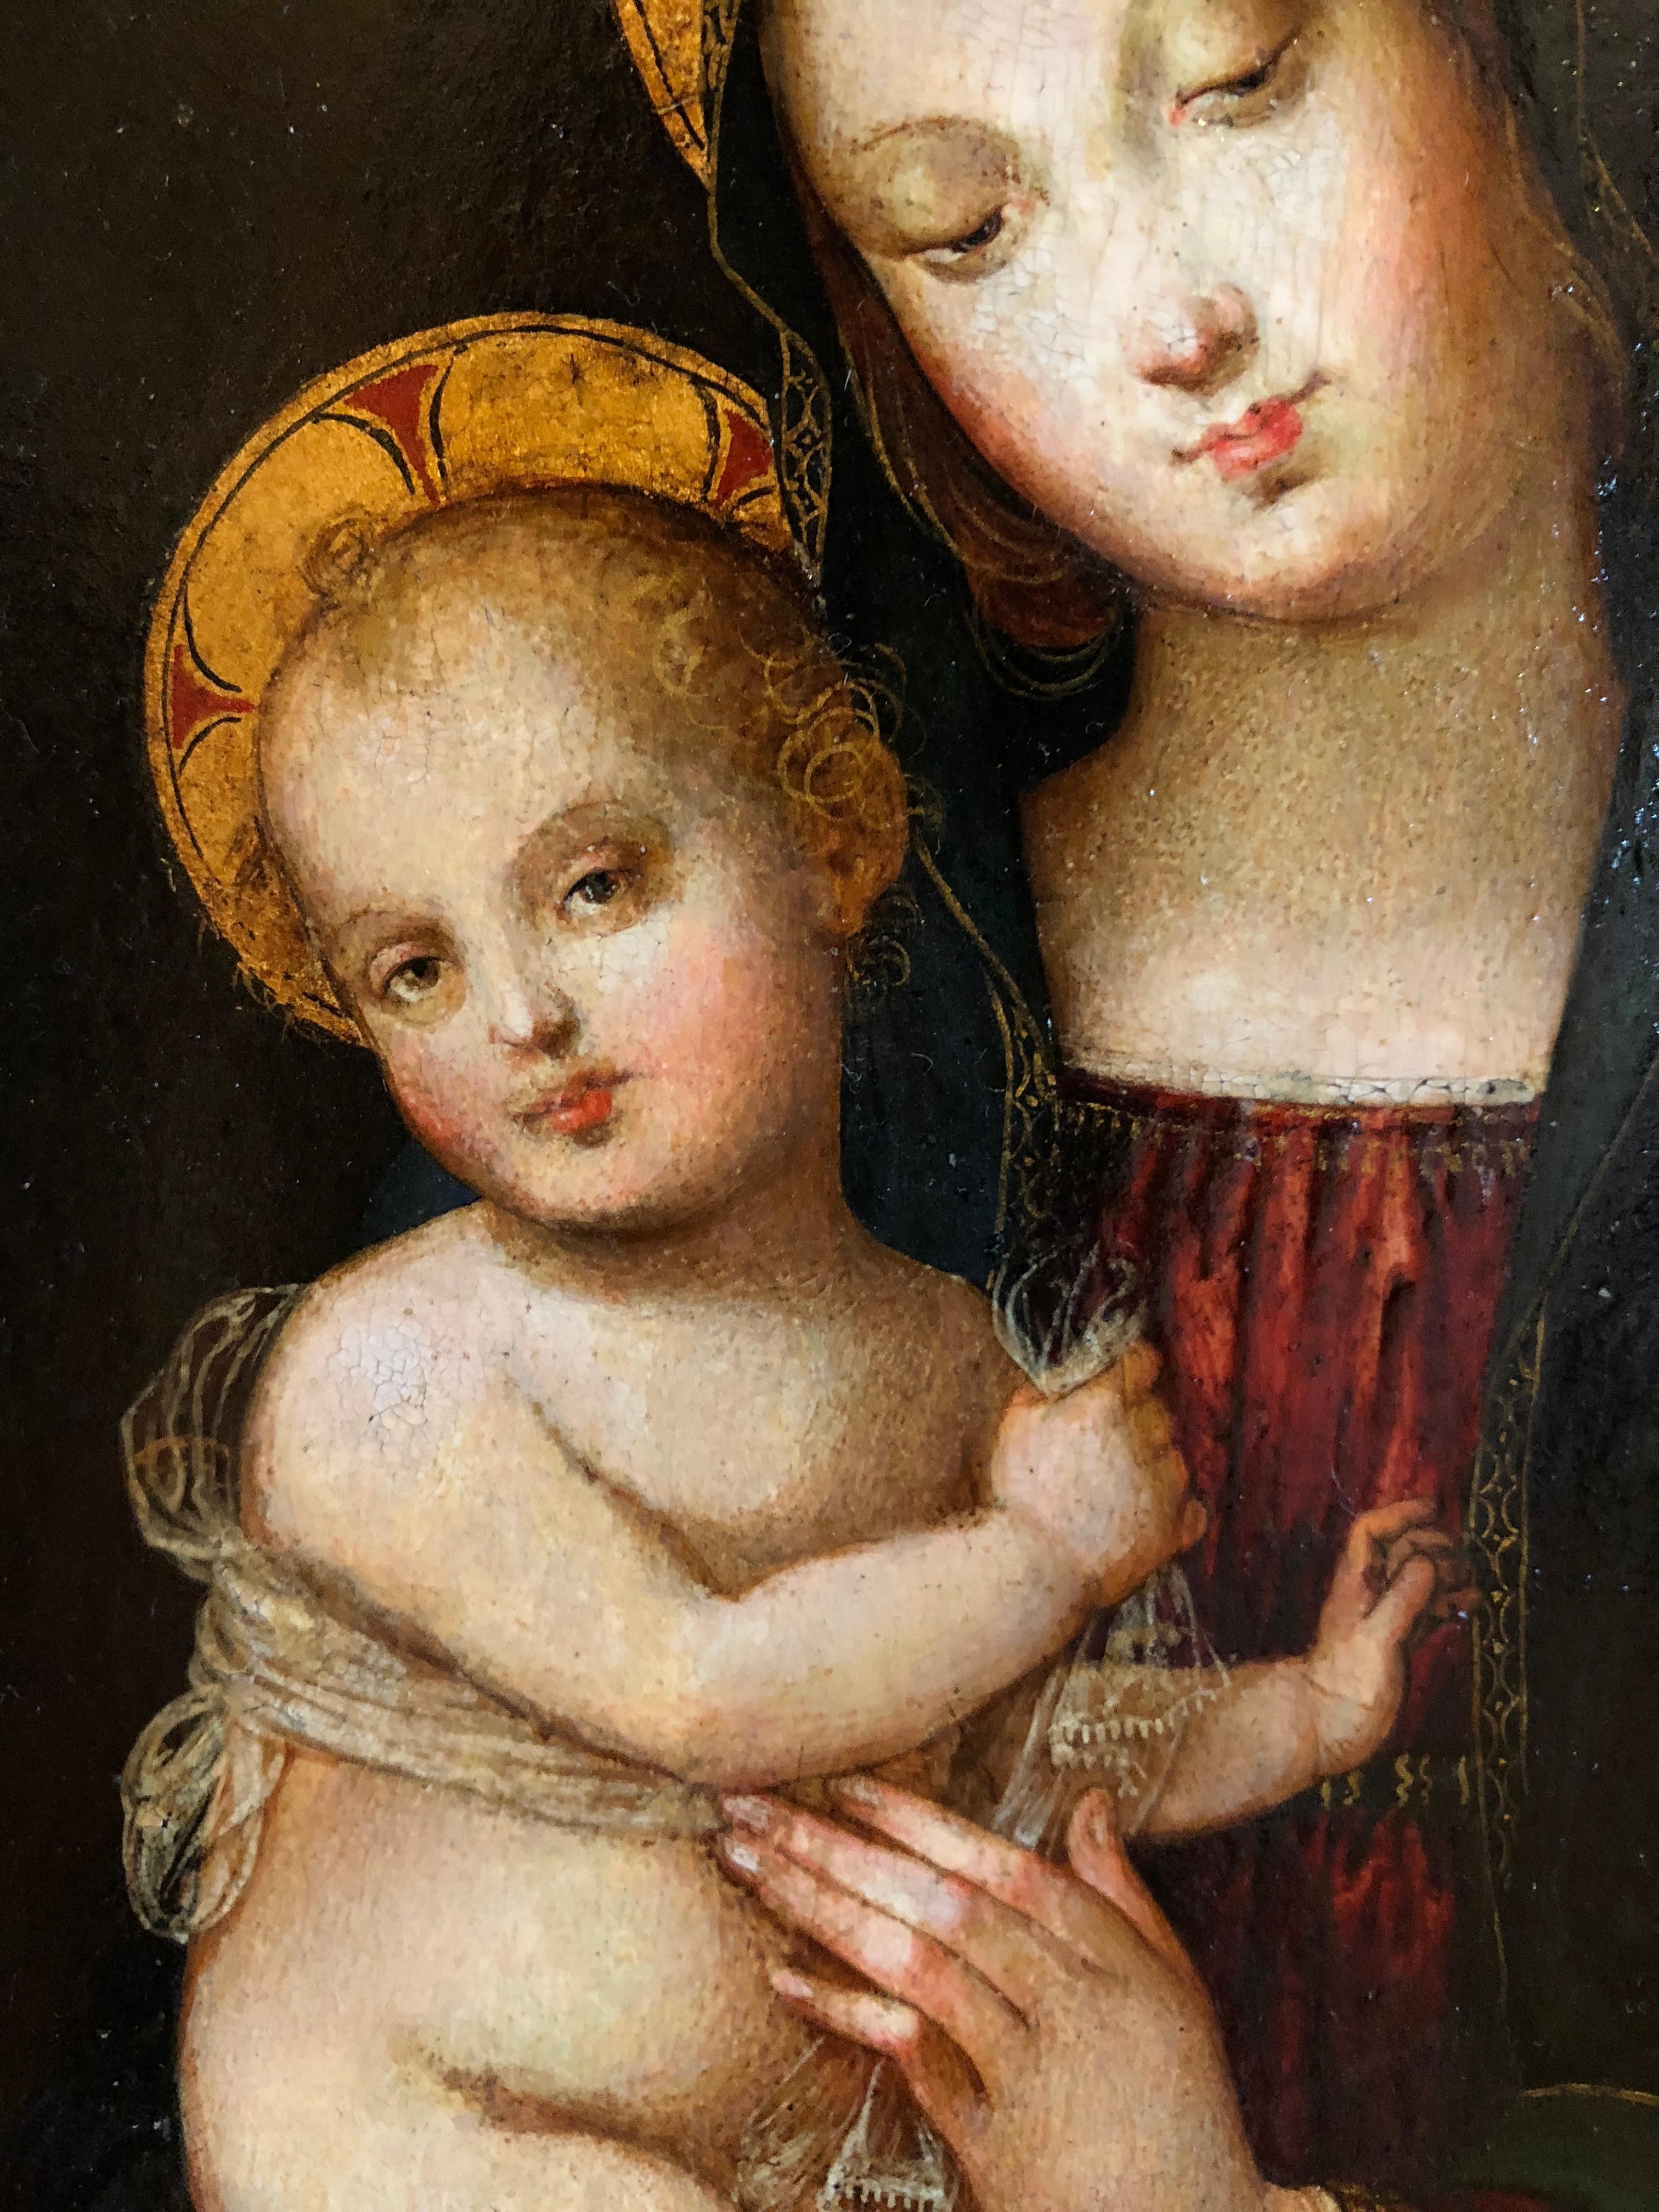 Madonna and Child - Renaissance Painting by Lo Spagna